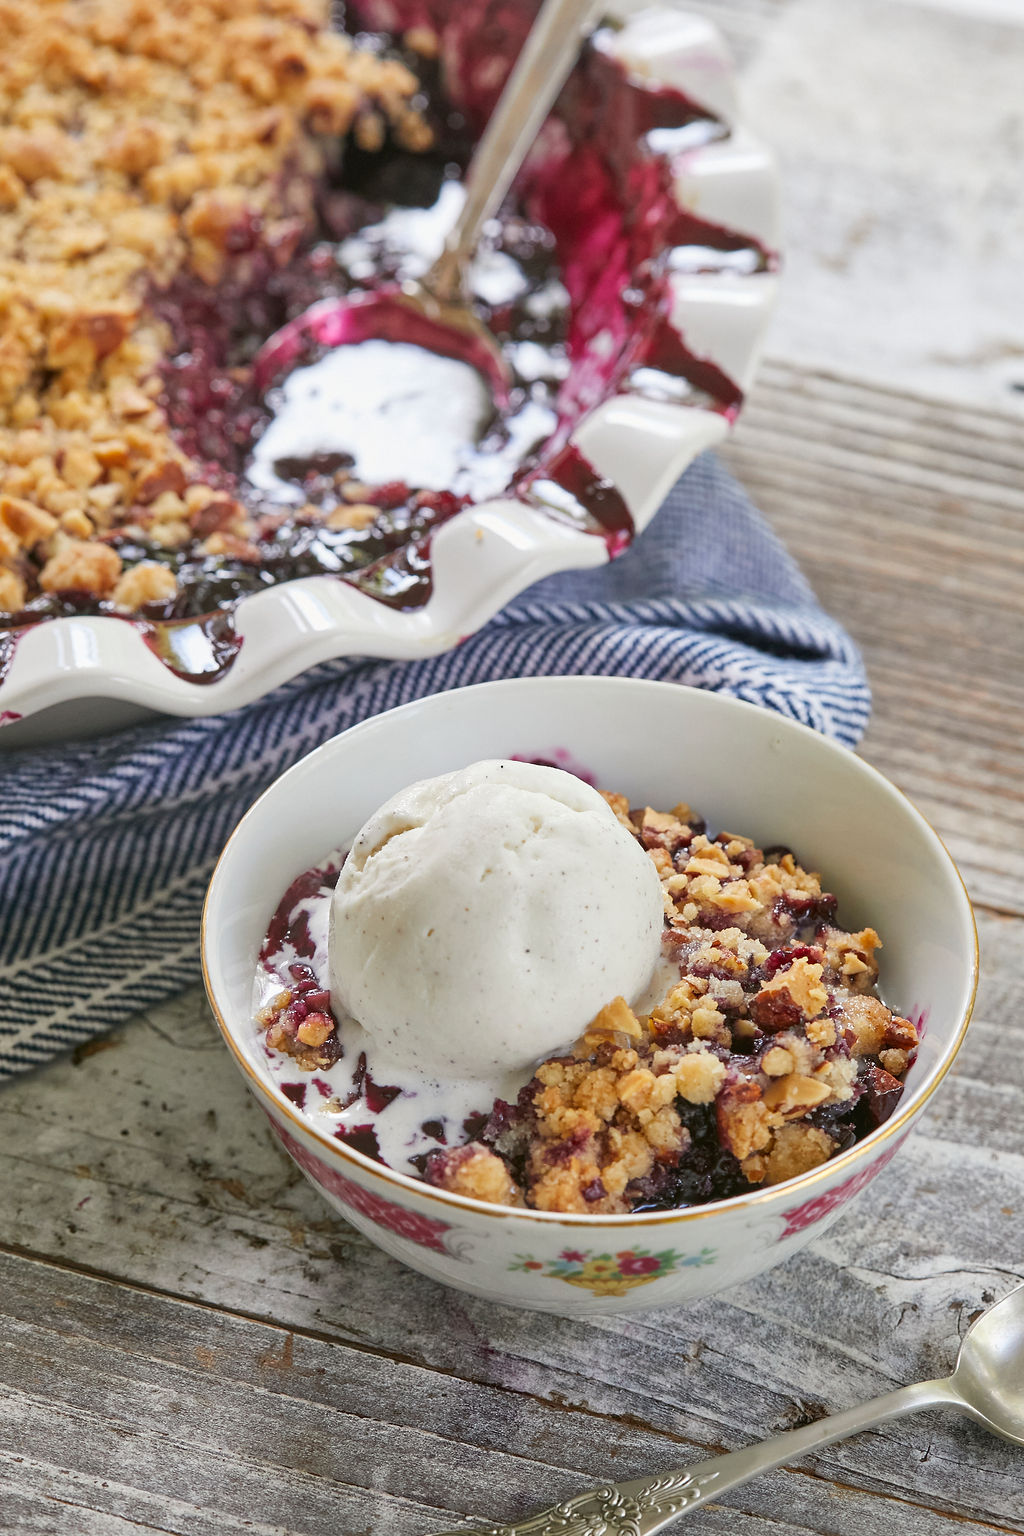 A serving of my Blueberry Crisp, topped with vanilla ice cream.